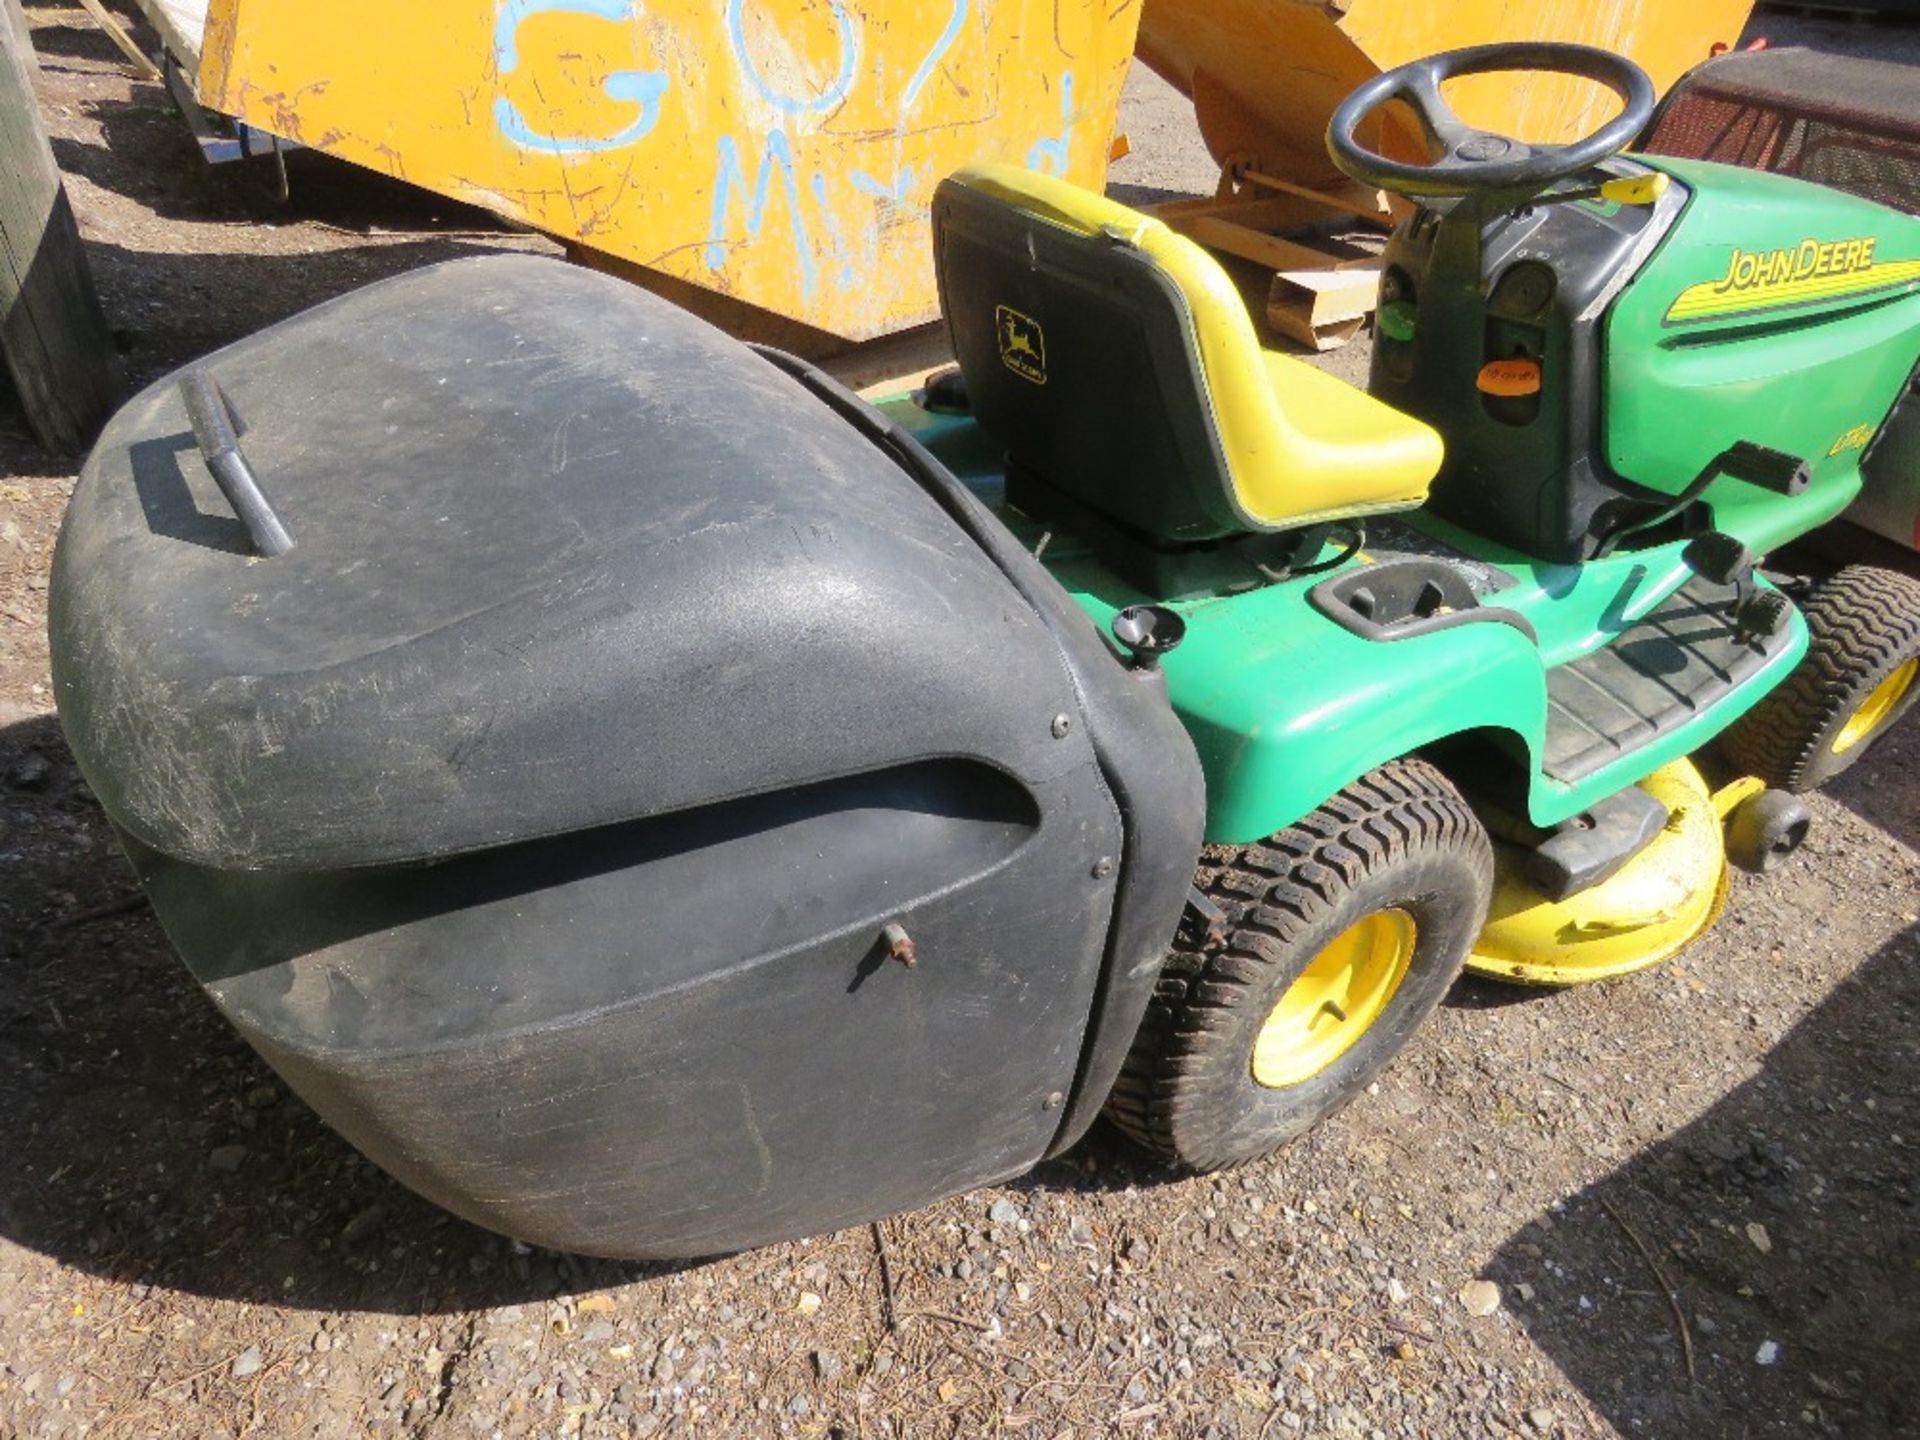 JOHN DEERE LTR180 PETROL ENGINED RIDE ON MOWER WITH COLLECTOR. WHEN TESTED WAS SEEN TO START, DRIVE, - Image 5 of 10